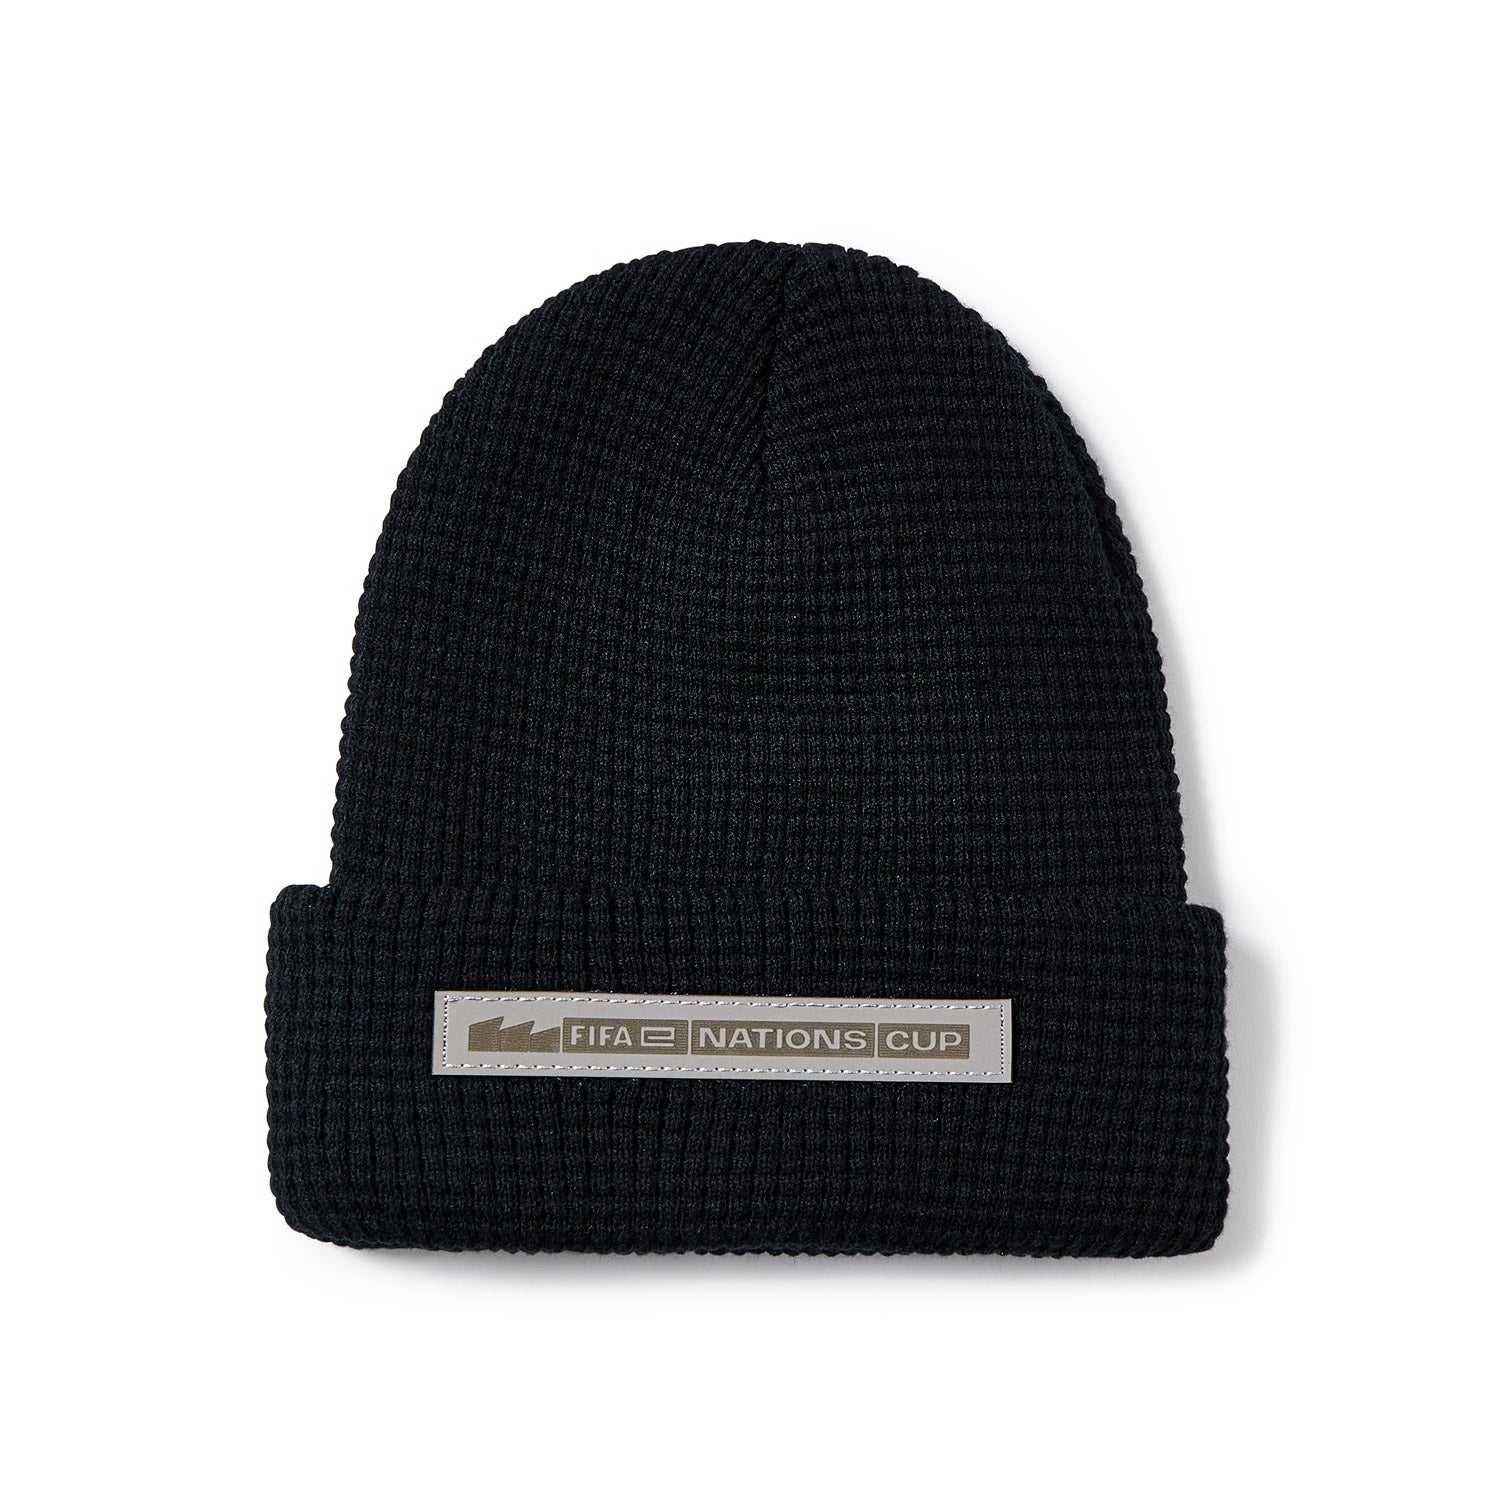 FIFAe Nations Cup Beanie